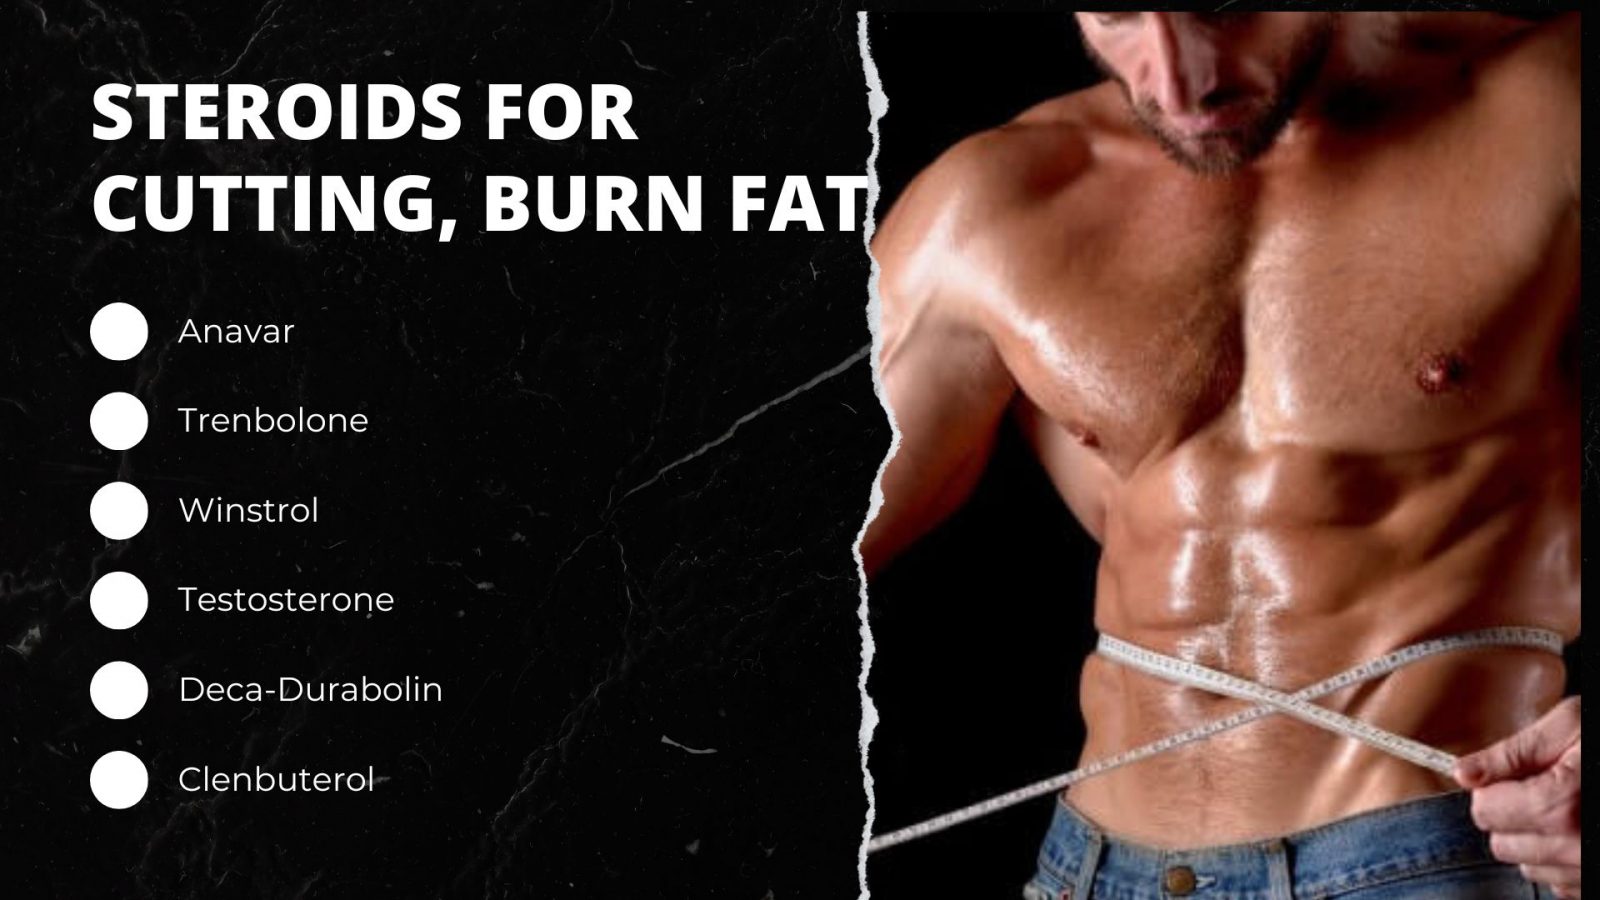 Best Steroids For Weight Loss - Steroids For Cutting, Burn Fat & Lean Muscle